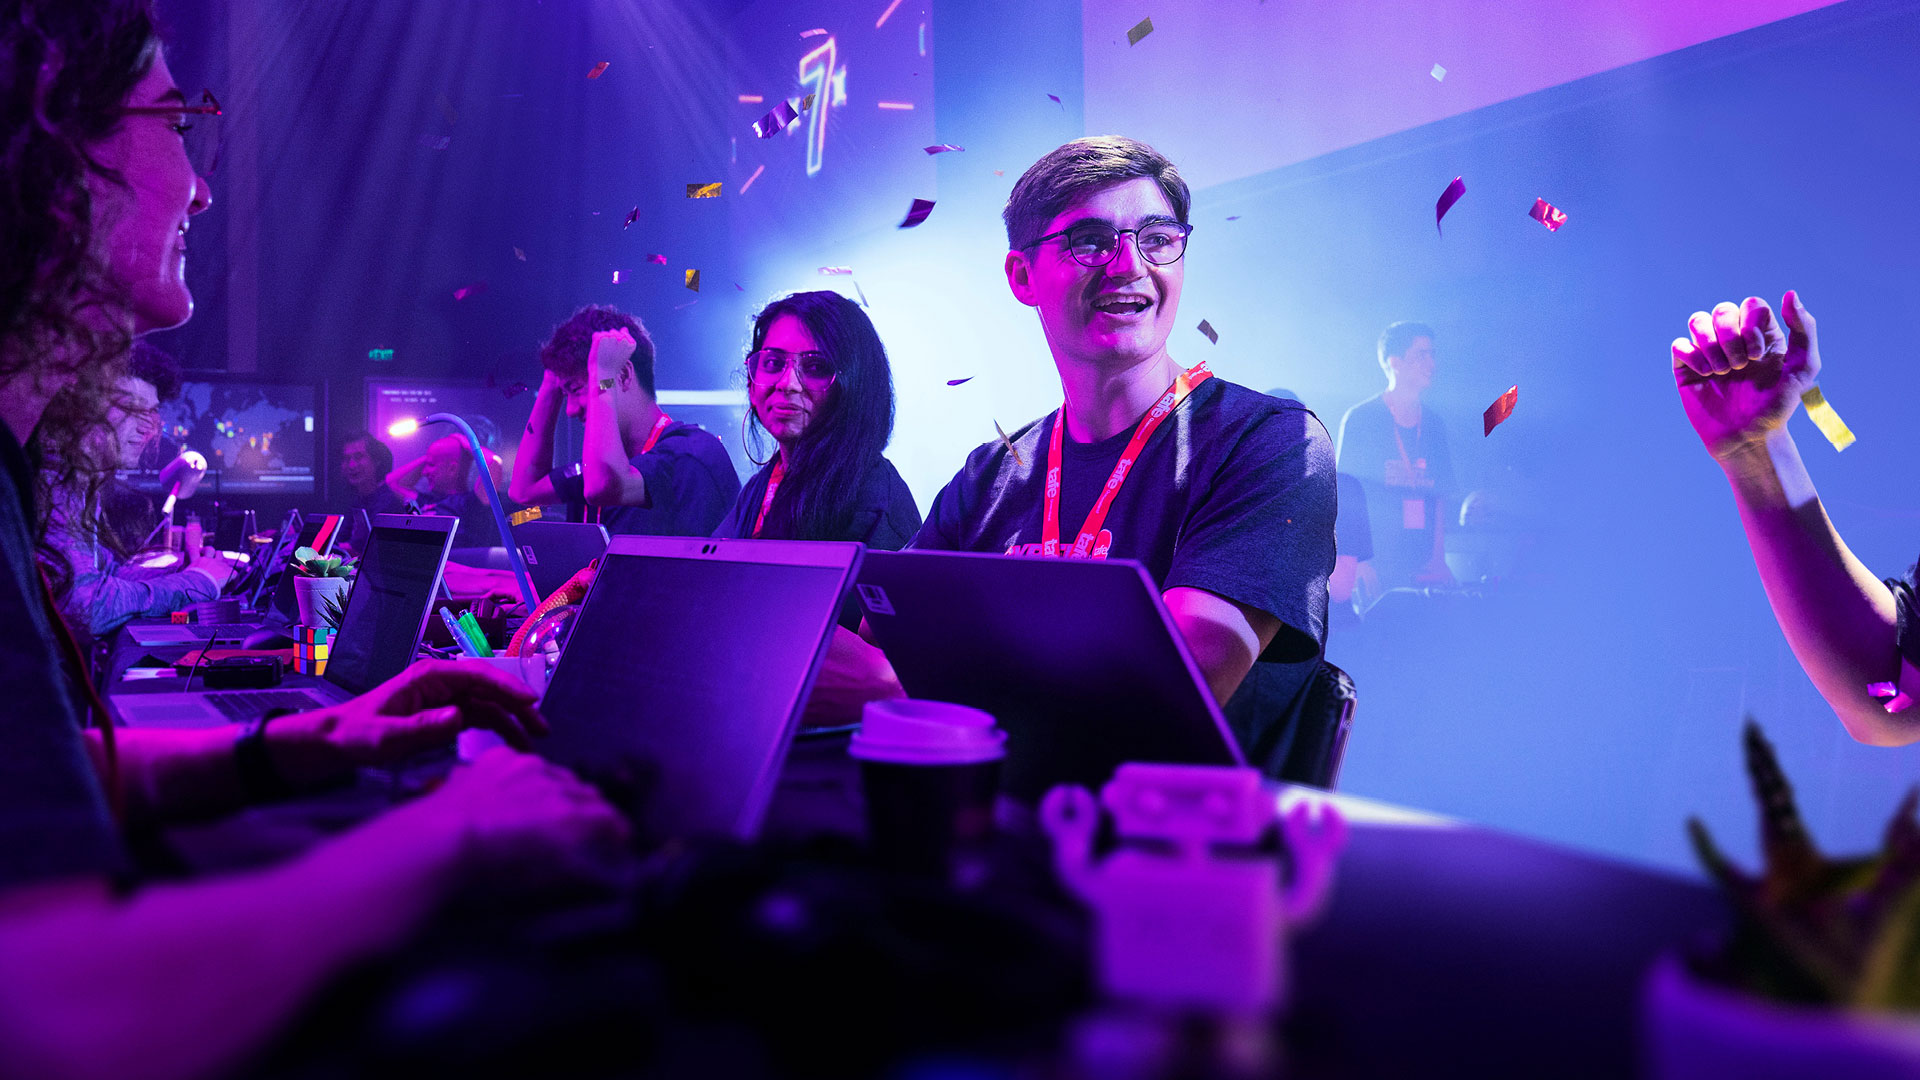 Students complete a hackathon with confetti falling from ceiling